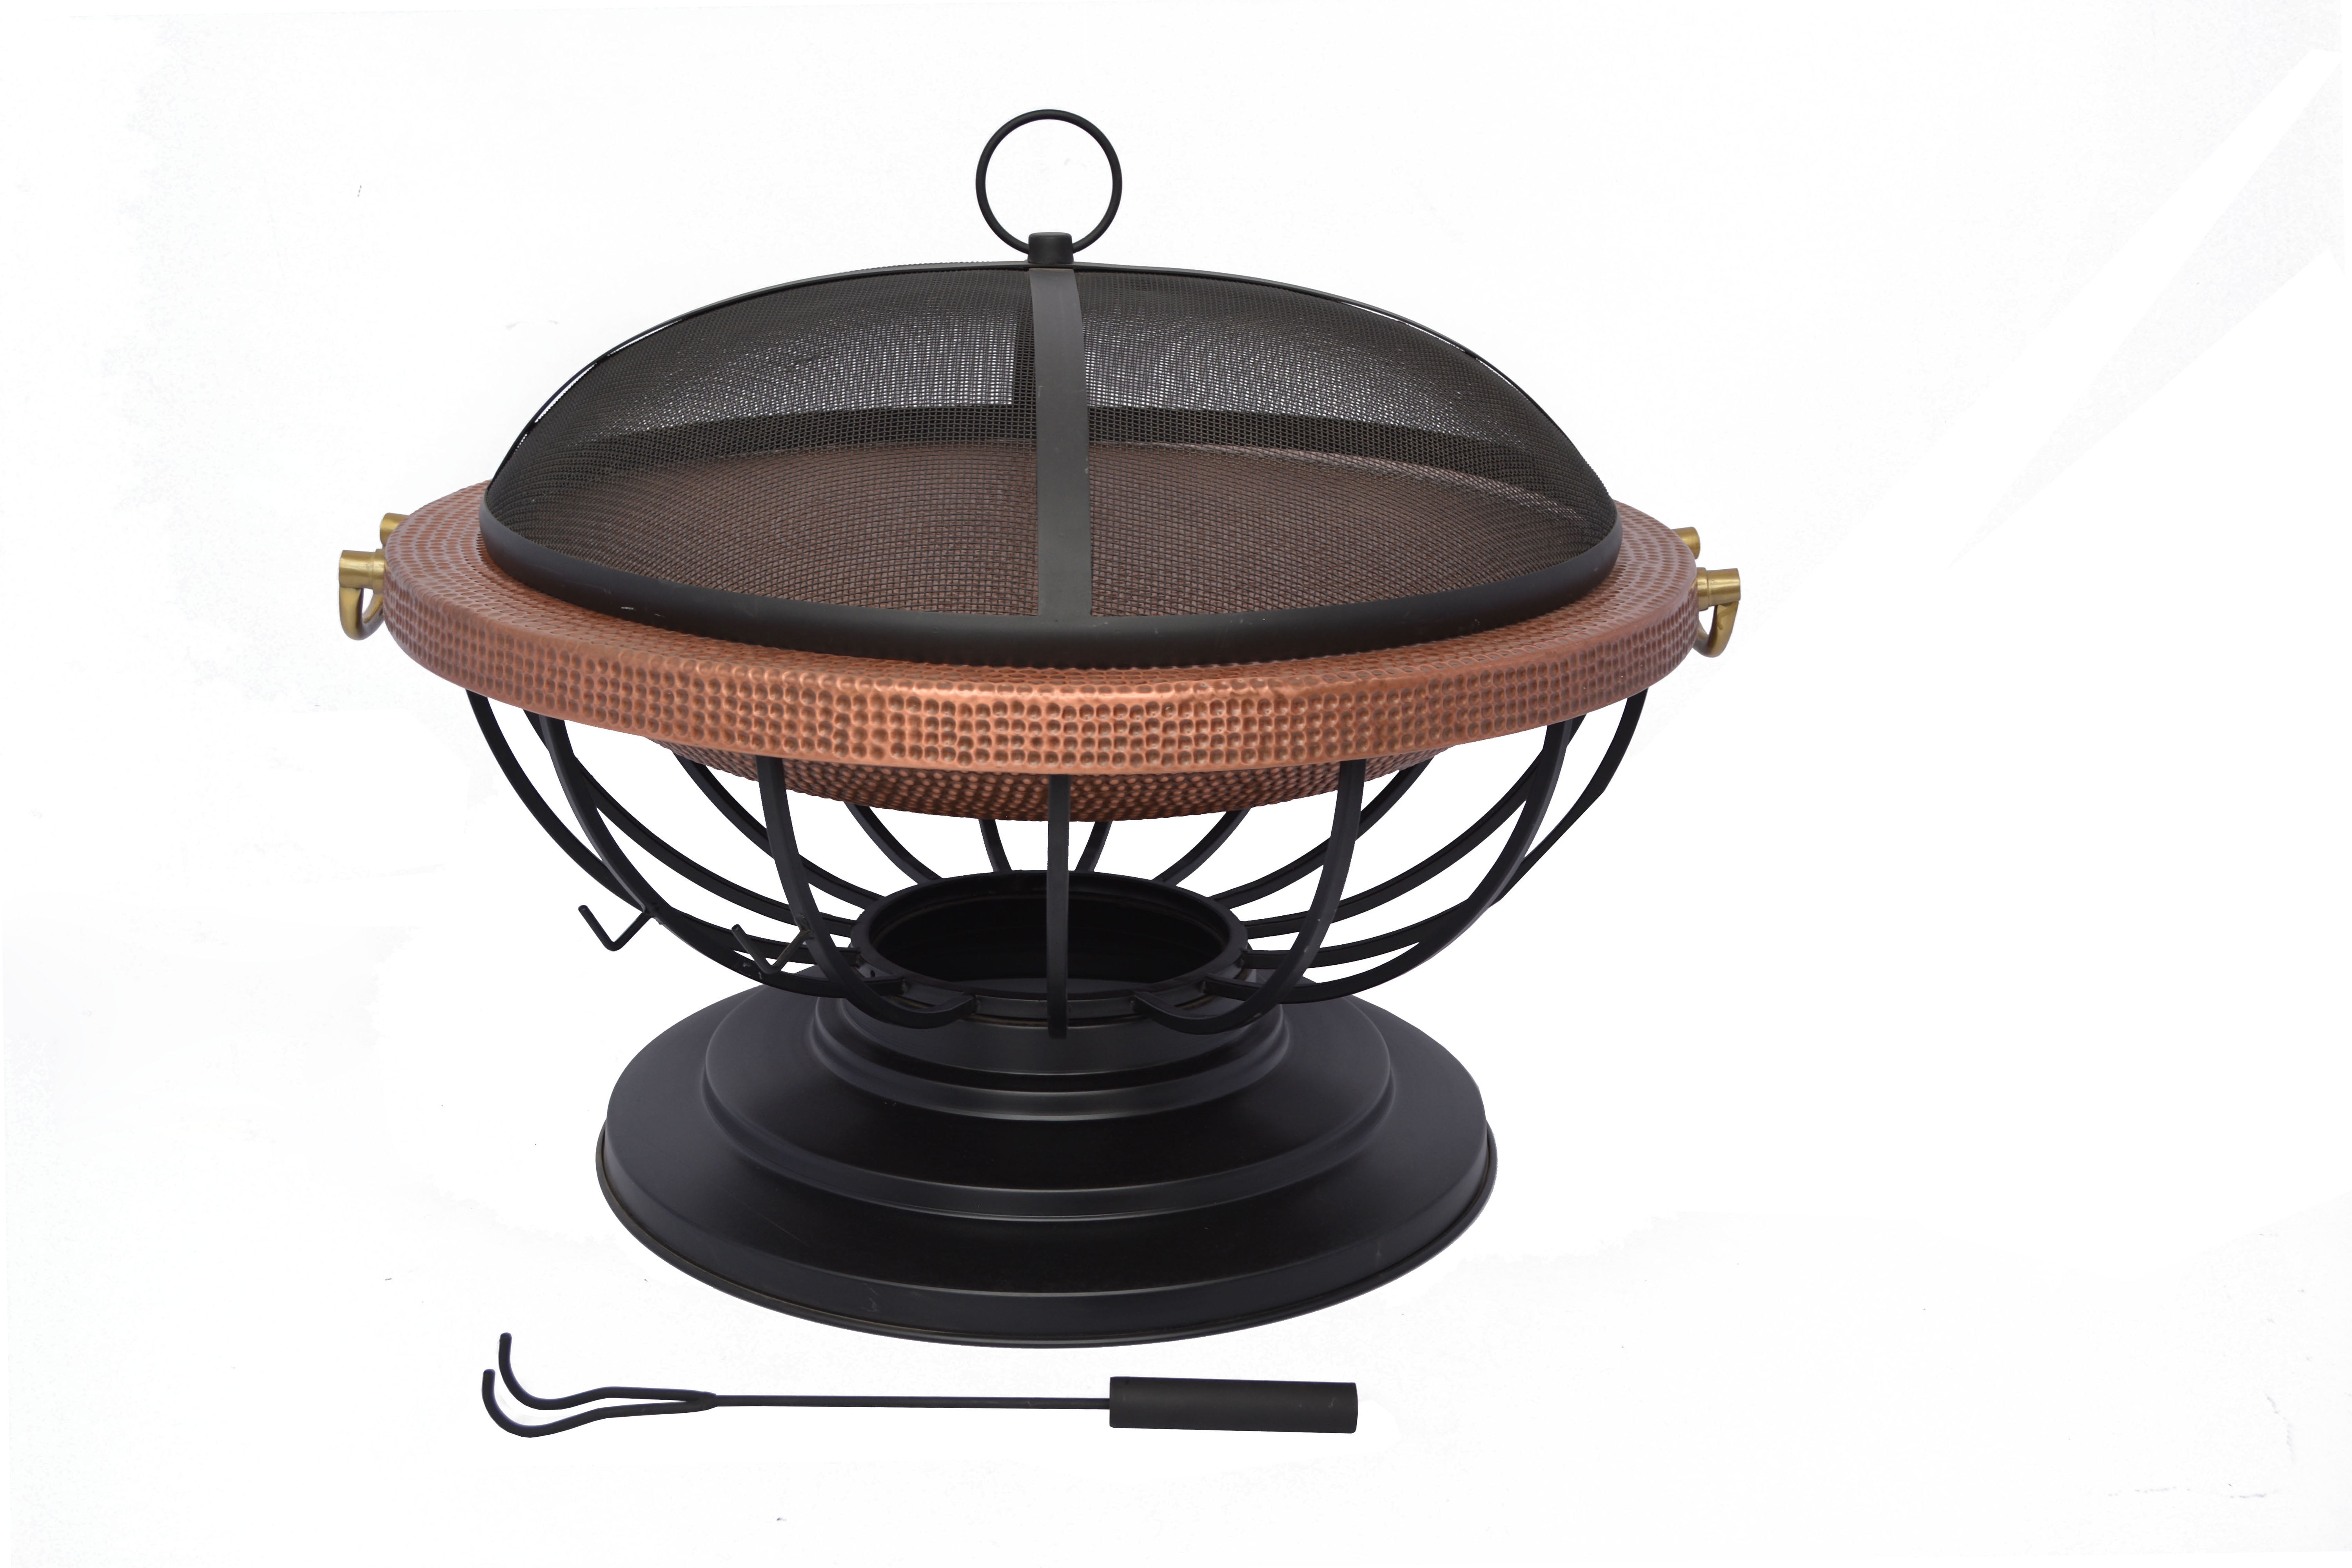 Hammered Copper Fire Pit With Tabletop, Copper Fire Pit Table